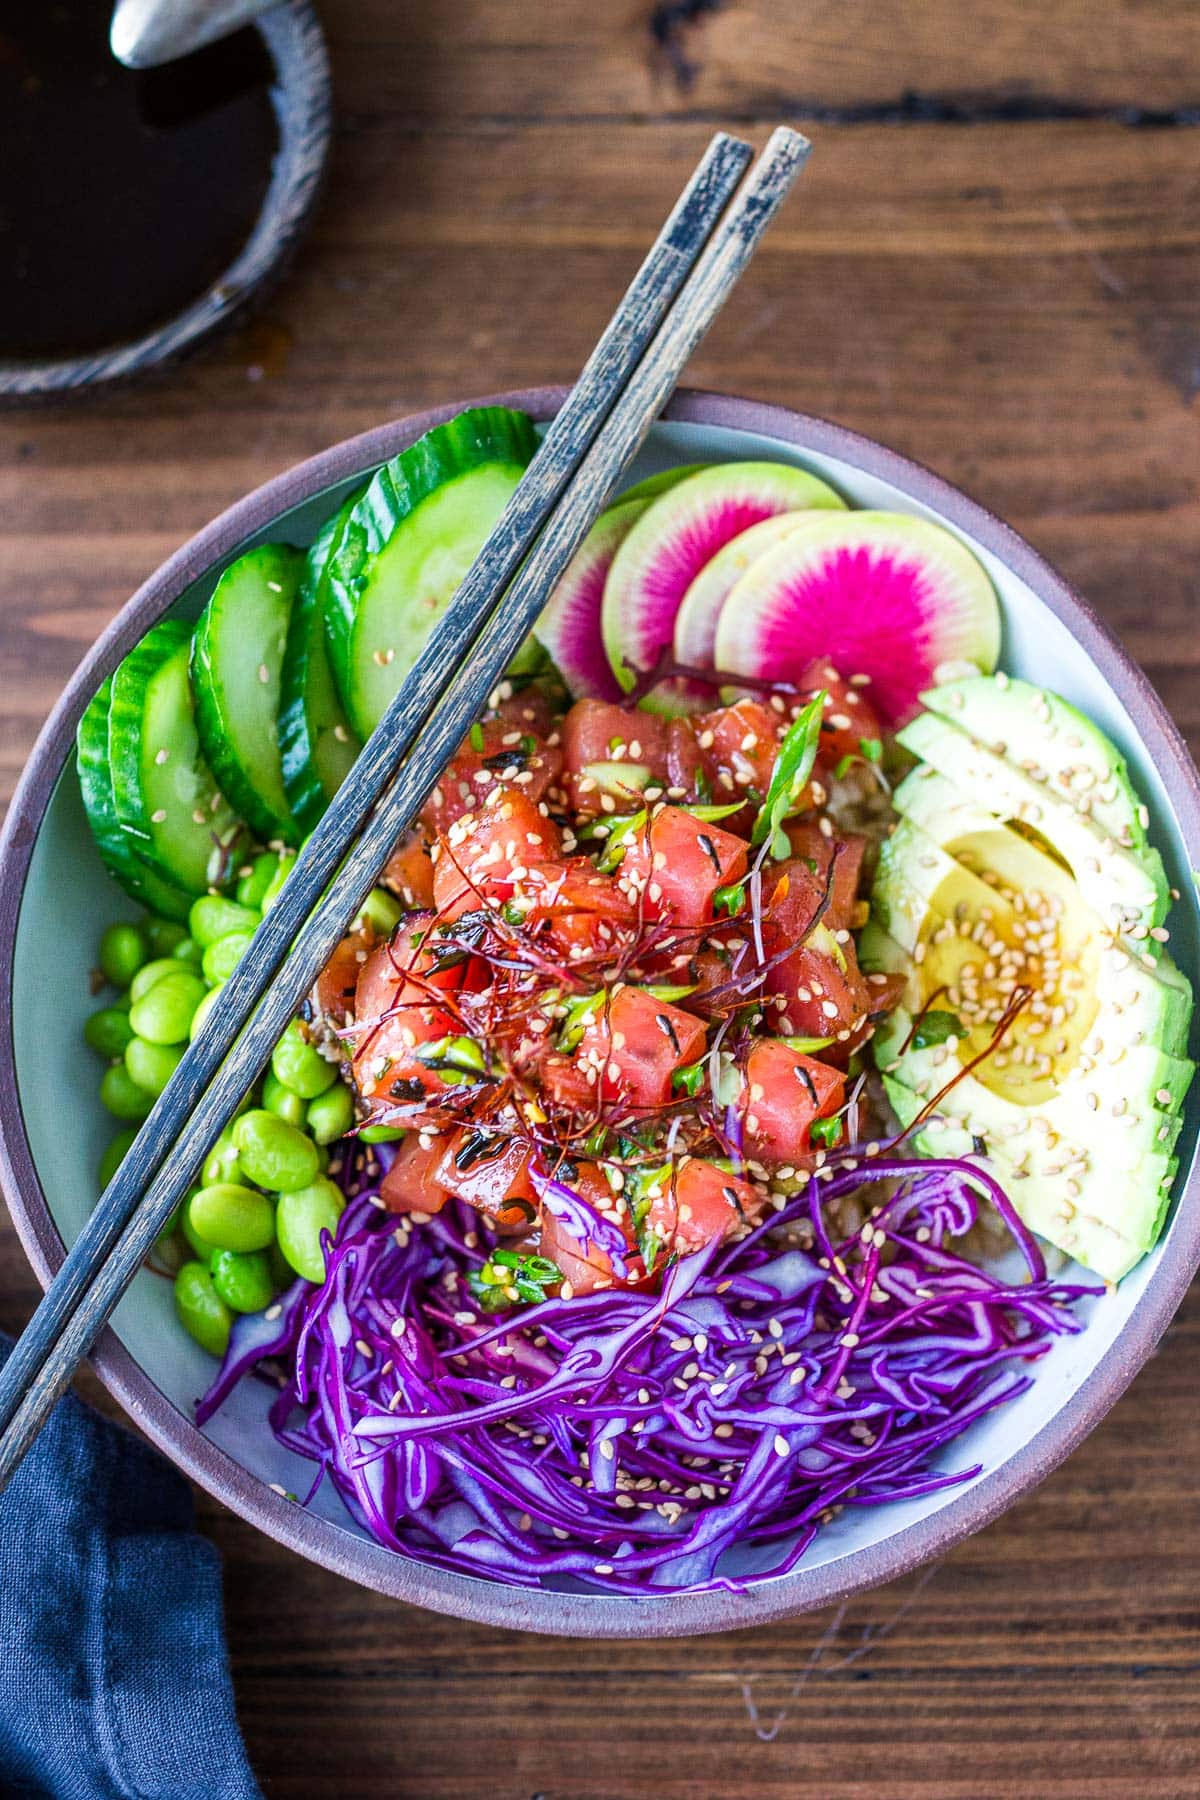 Poke Bowl - A healthy and very good dish from Hawaii.